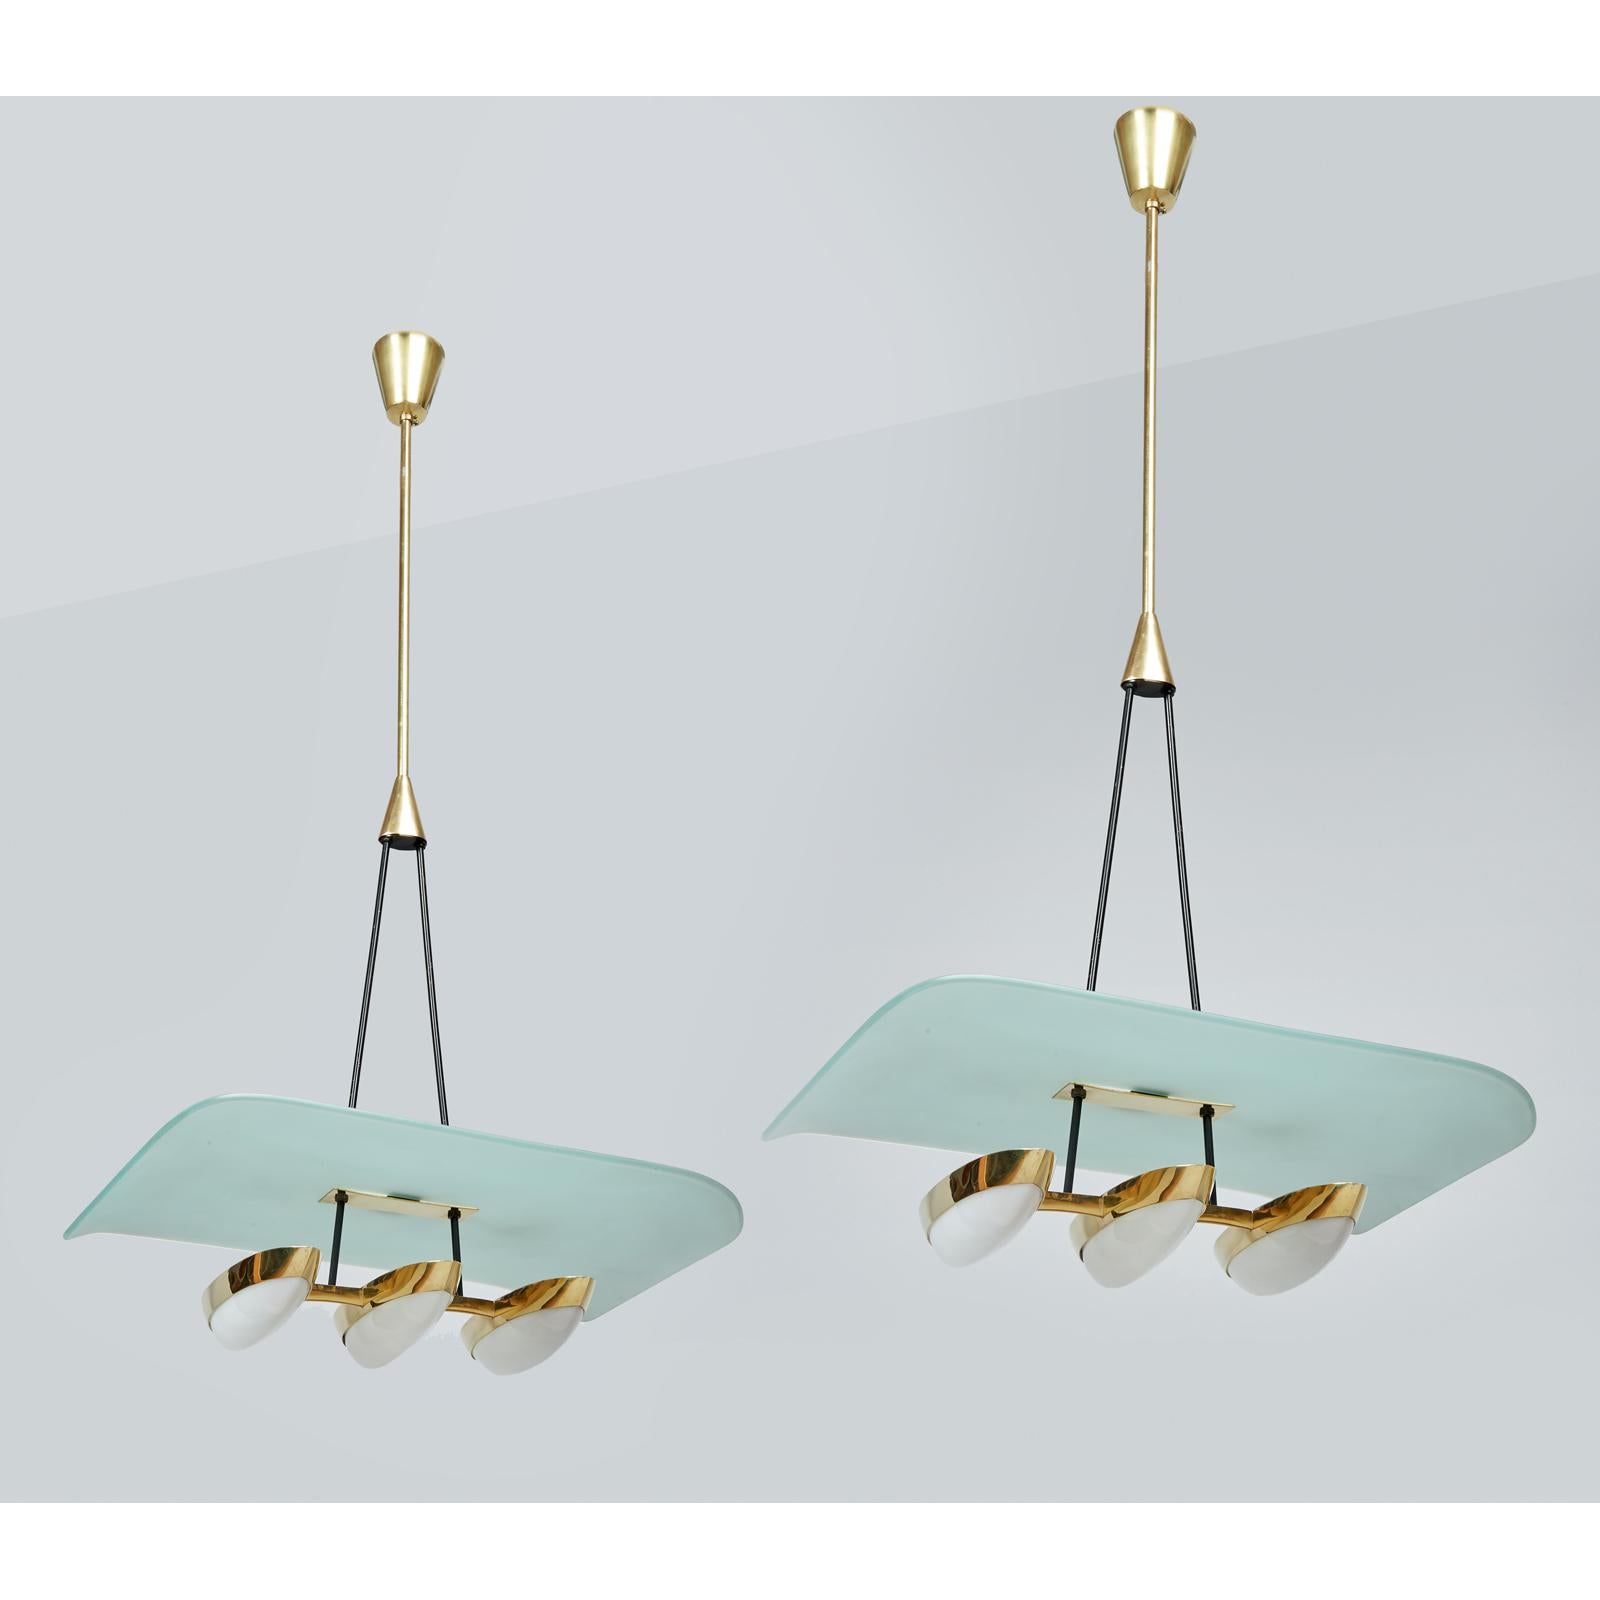 Italian Arredoluce Pair of Glass, Brass and Perspex Pendant Chandeliers, Italy 1950's